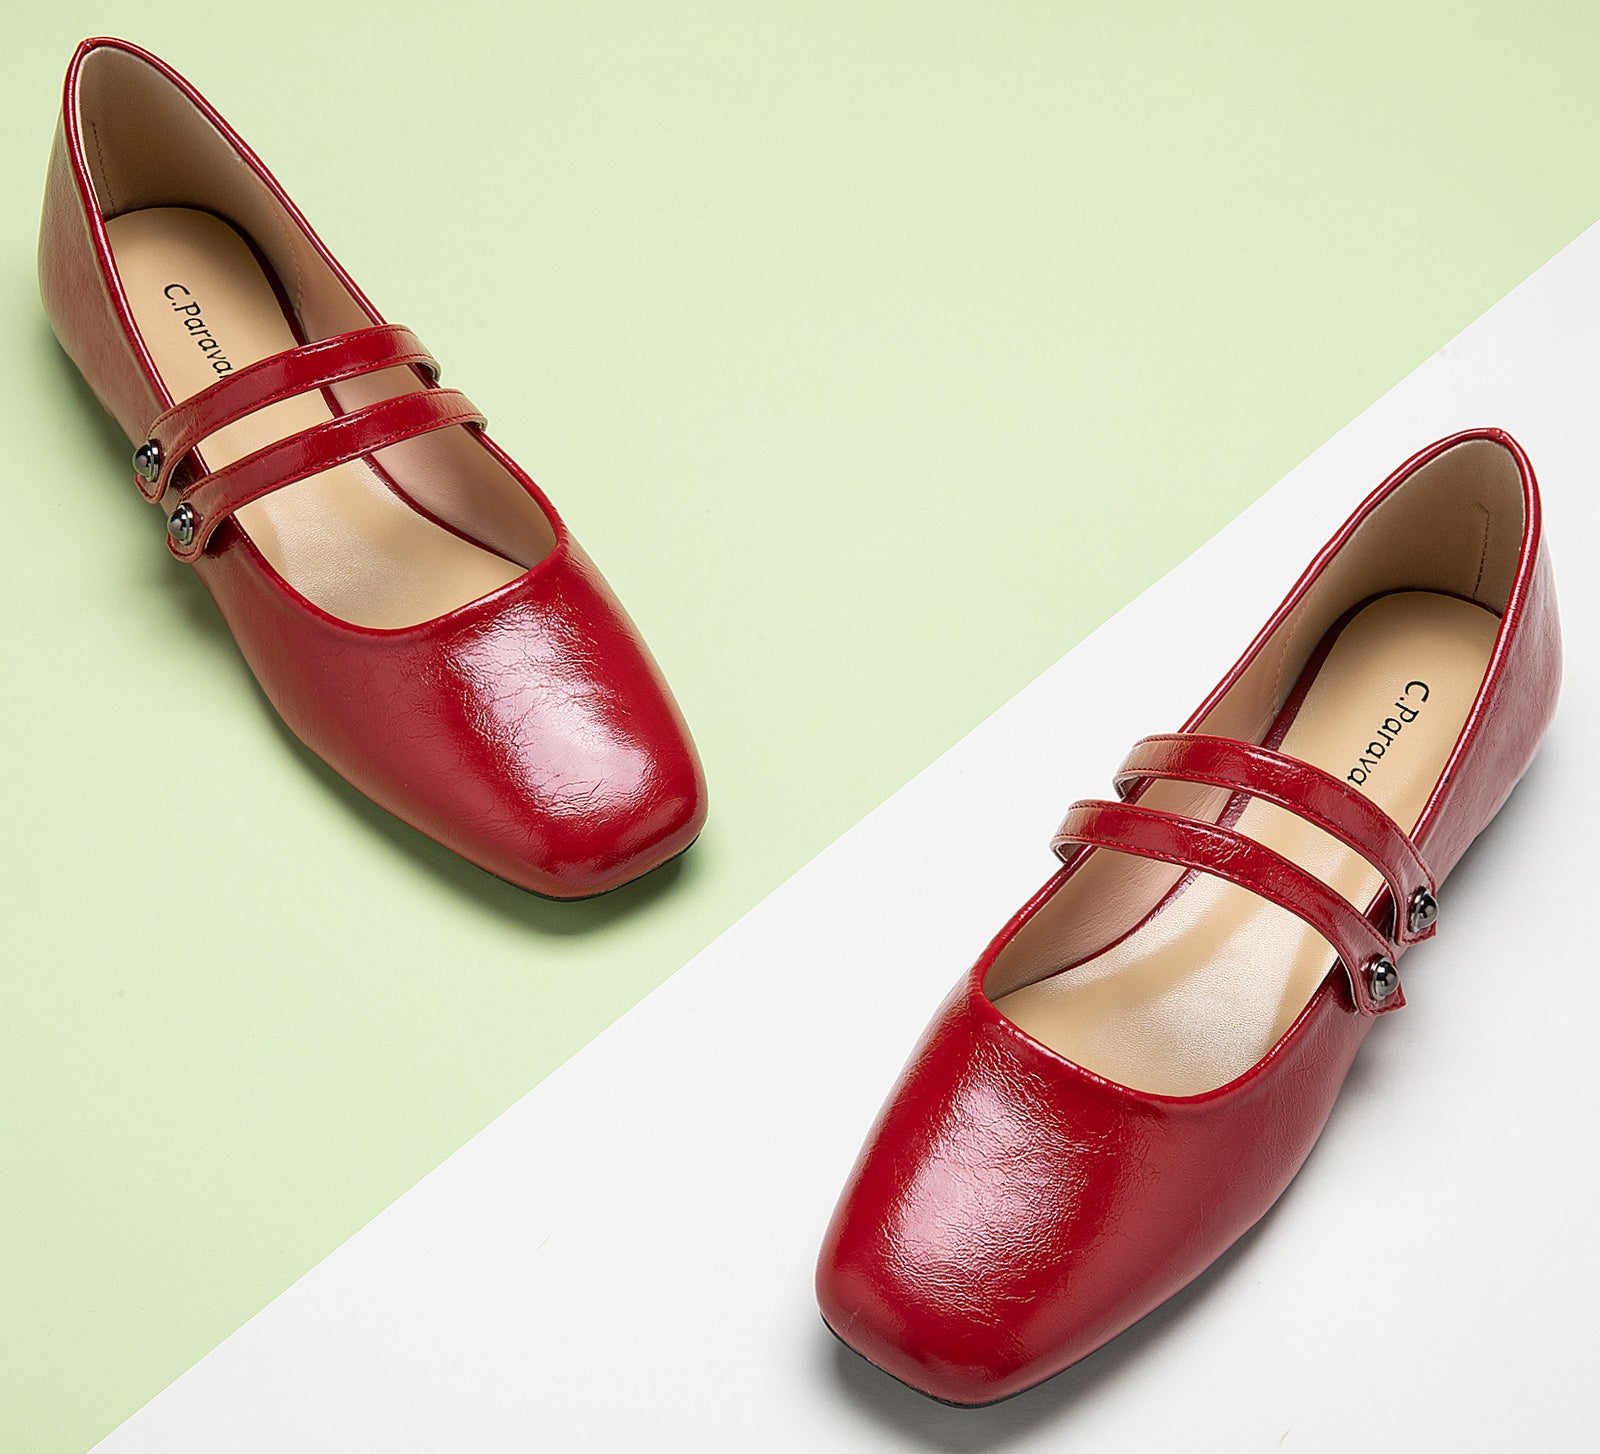 Passionate Red: Red Double Stripes Mary Jane shoes, a bold and stylish choice for making a statement